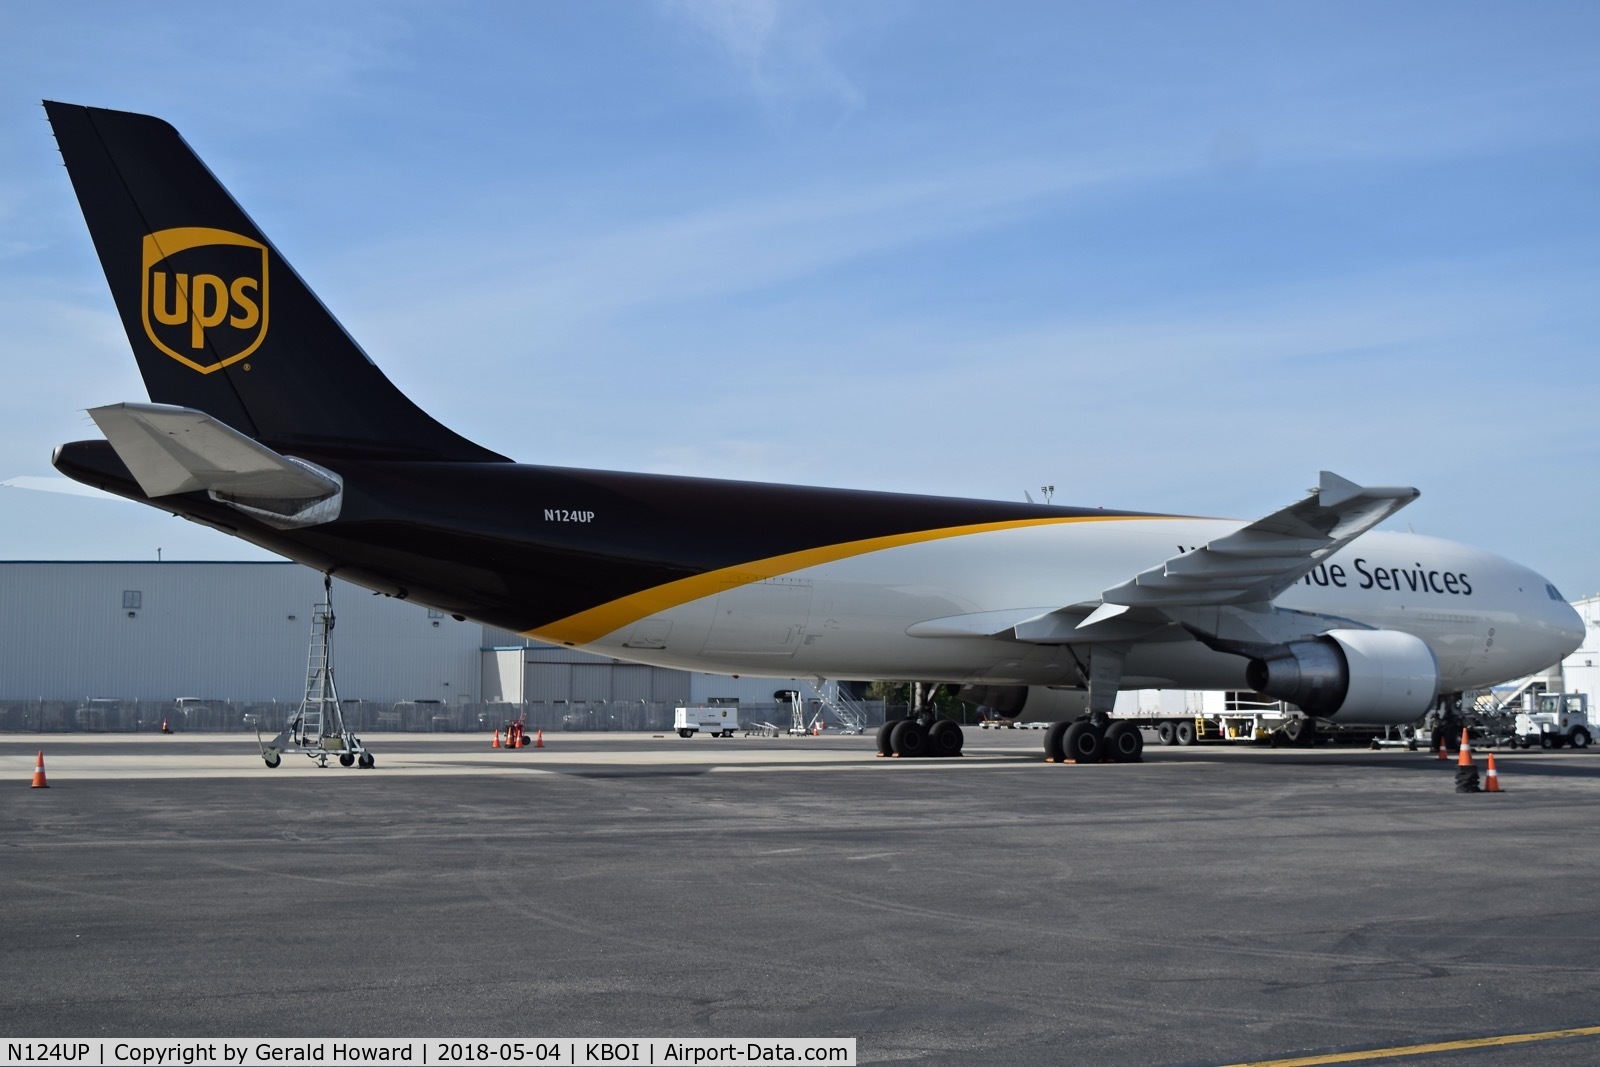 N124UP, 2000 Airbus A300F4-622R C/N 0808, Parked on the UPS ramp.